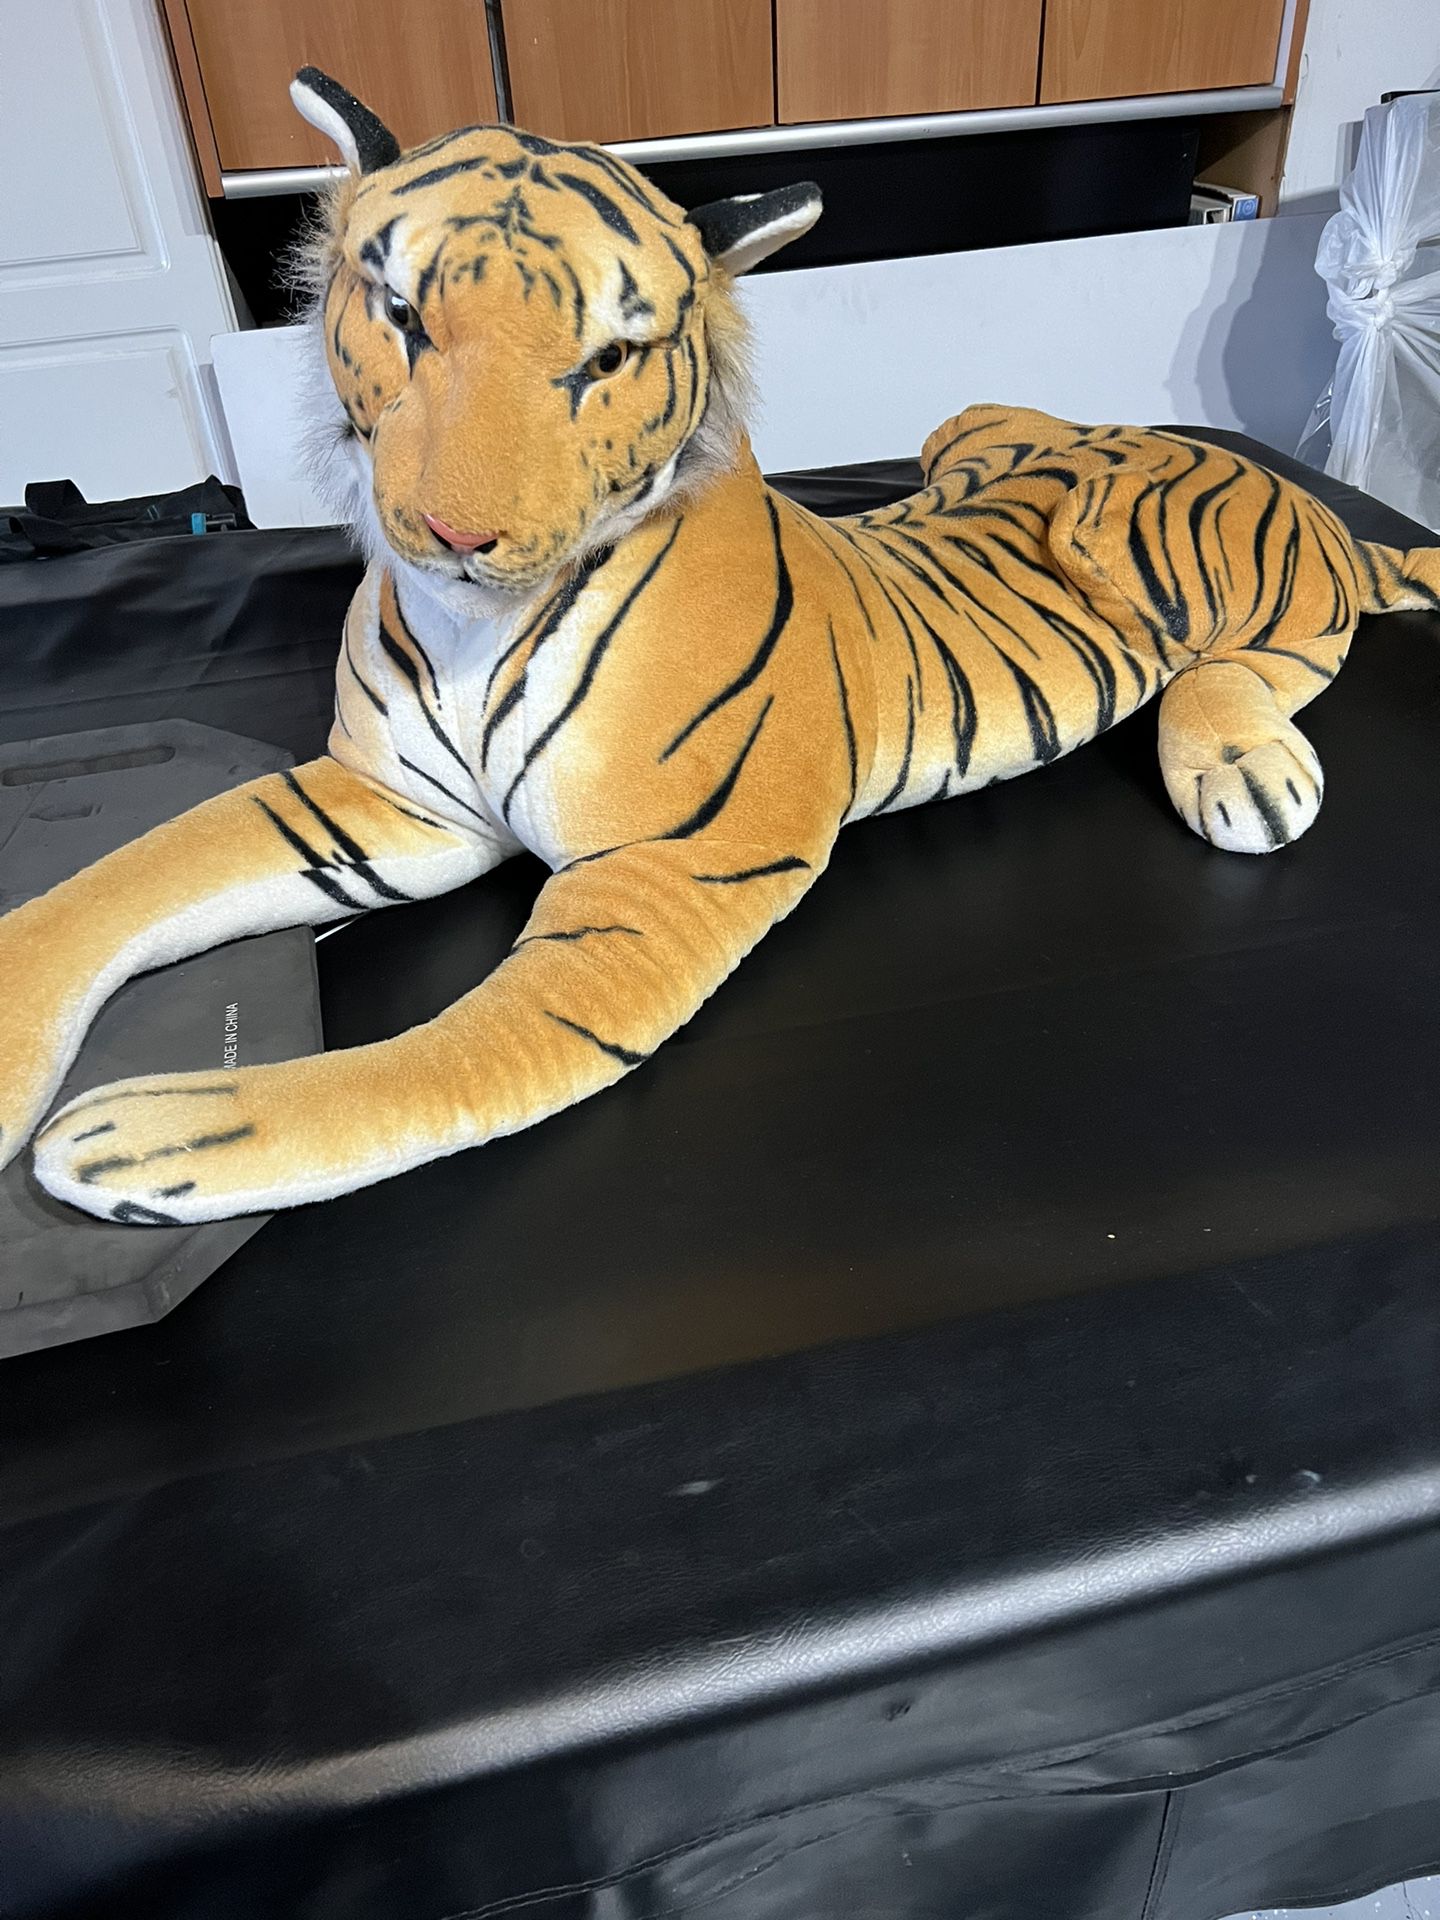 Tiger And Lion Stuffed Animals